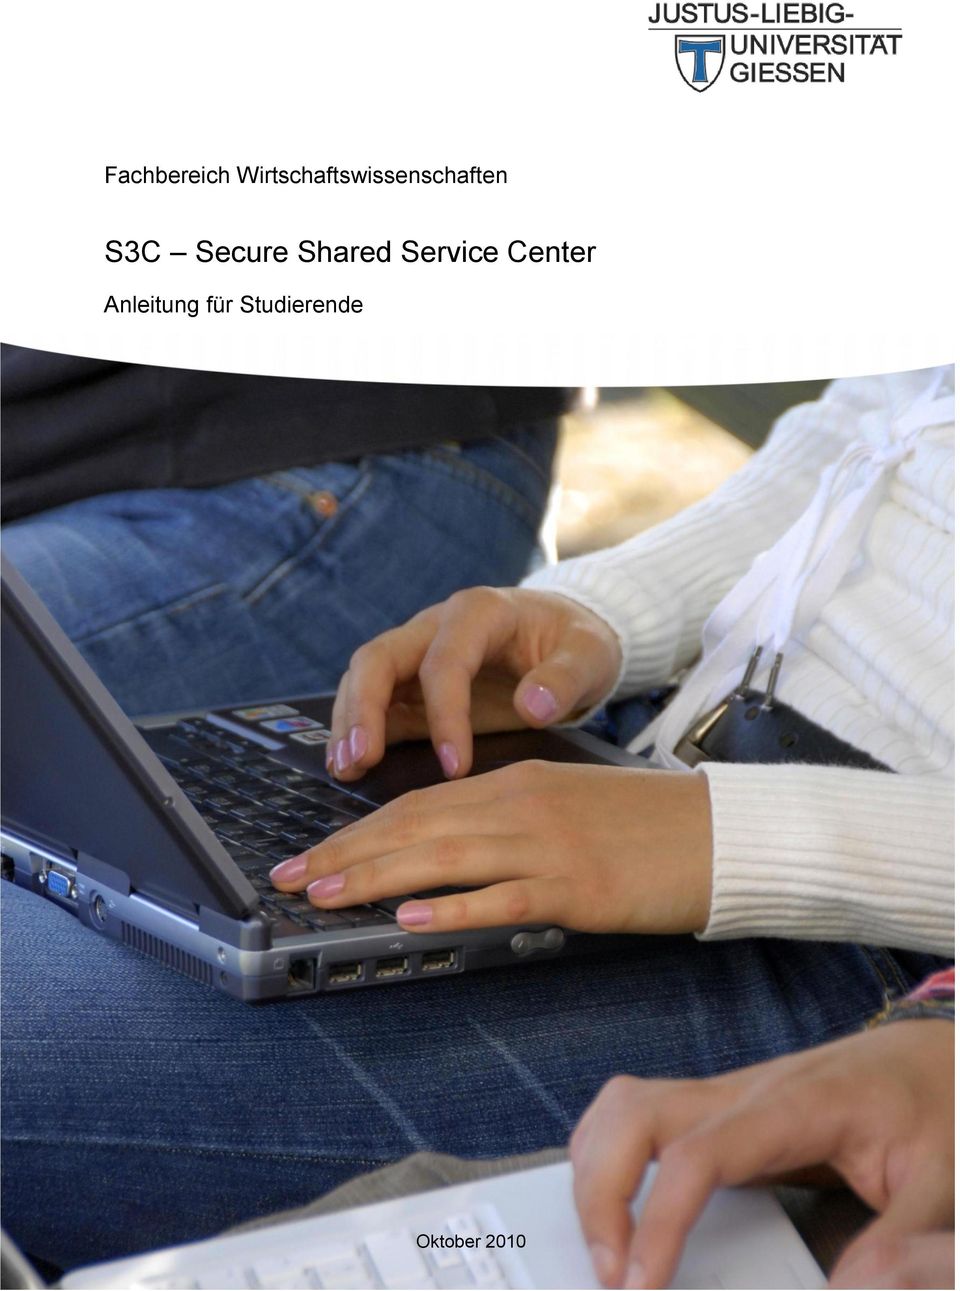 S3C Secure Shared Service